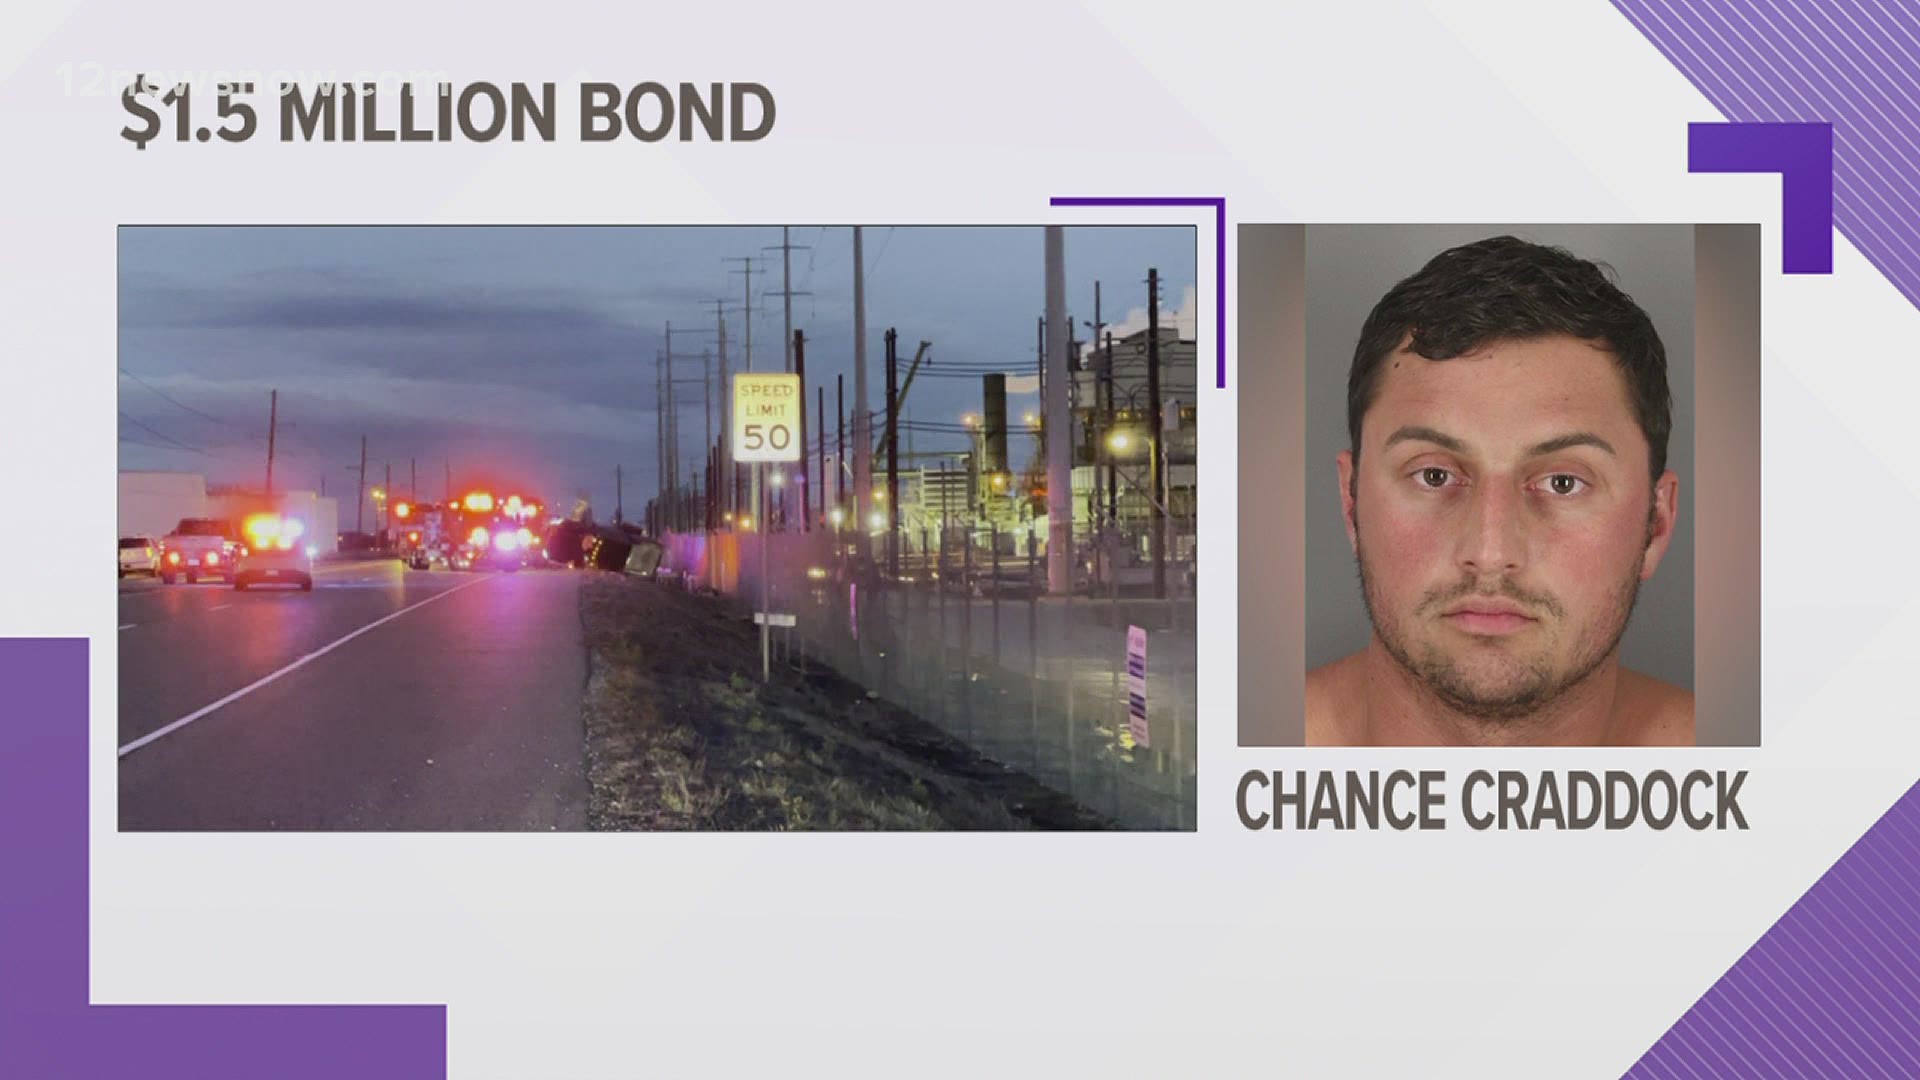 Blood alcohol tests revealed the man was two times over the legal limit. He remains behind bars on a $1.5 million bond.